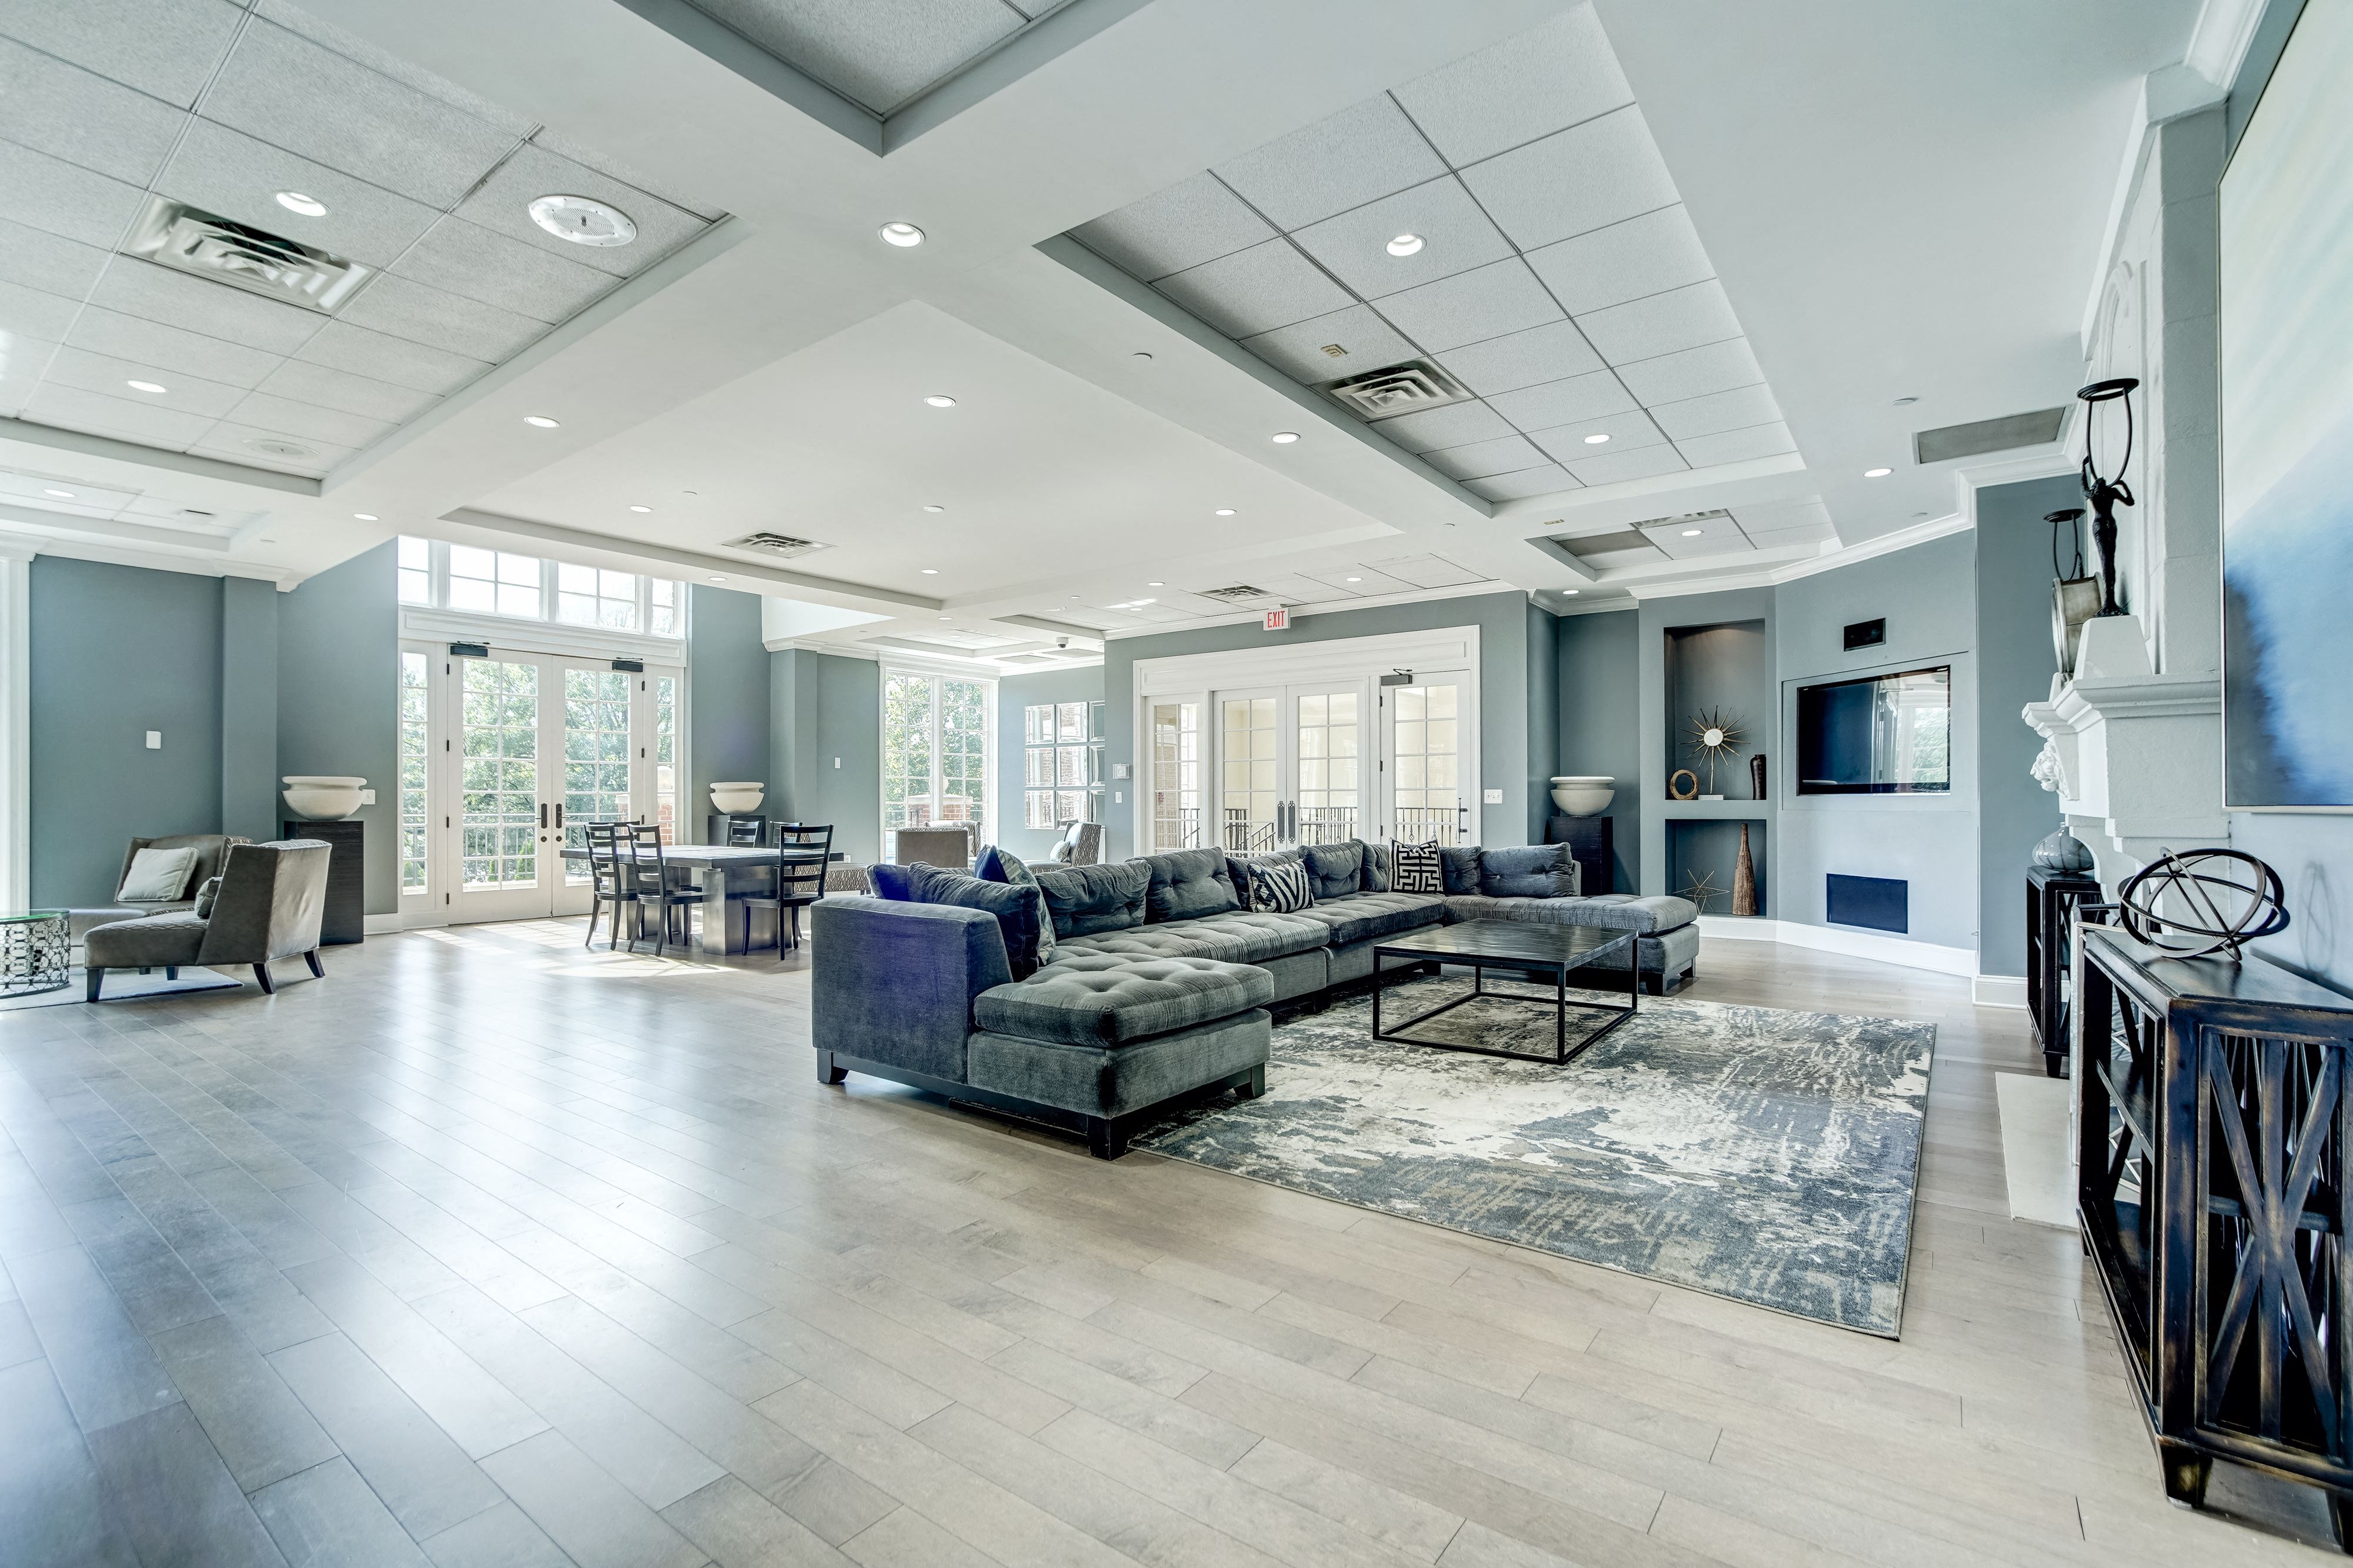 Expansive Resident Clubhouse with Plush Seating Areas, Cozy Fireplace, Balcony Area, and Bar